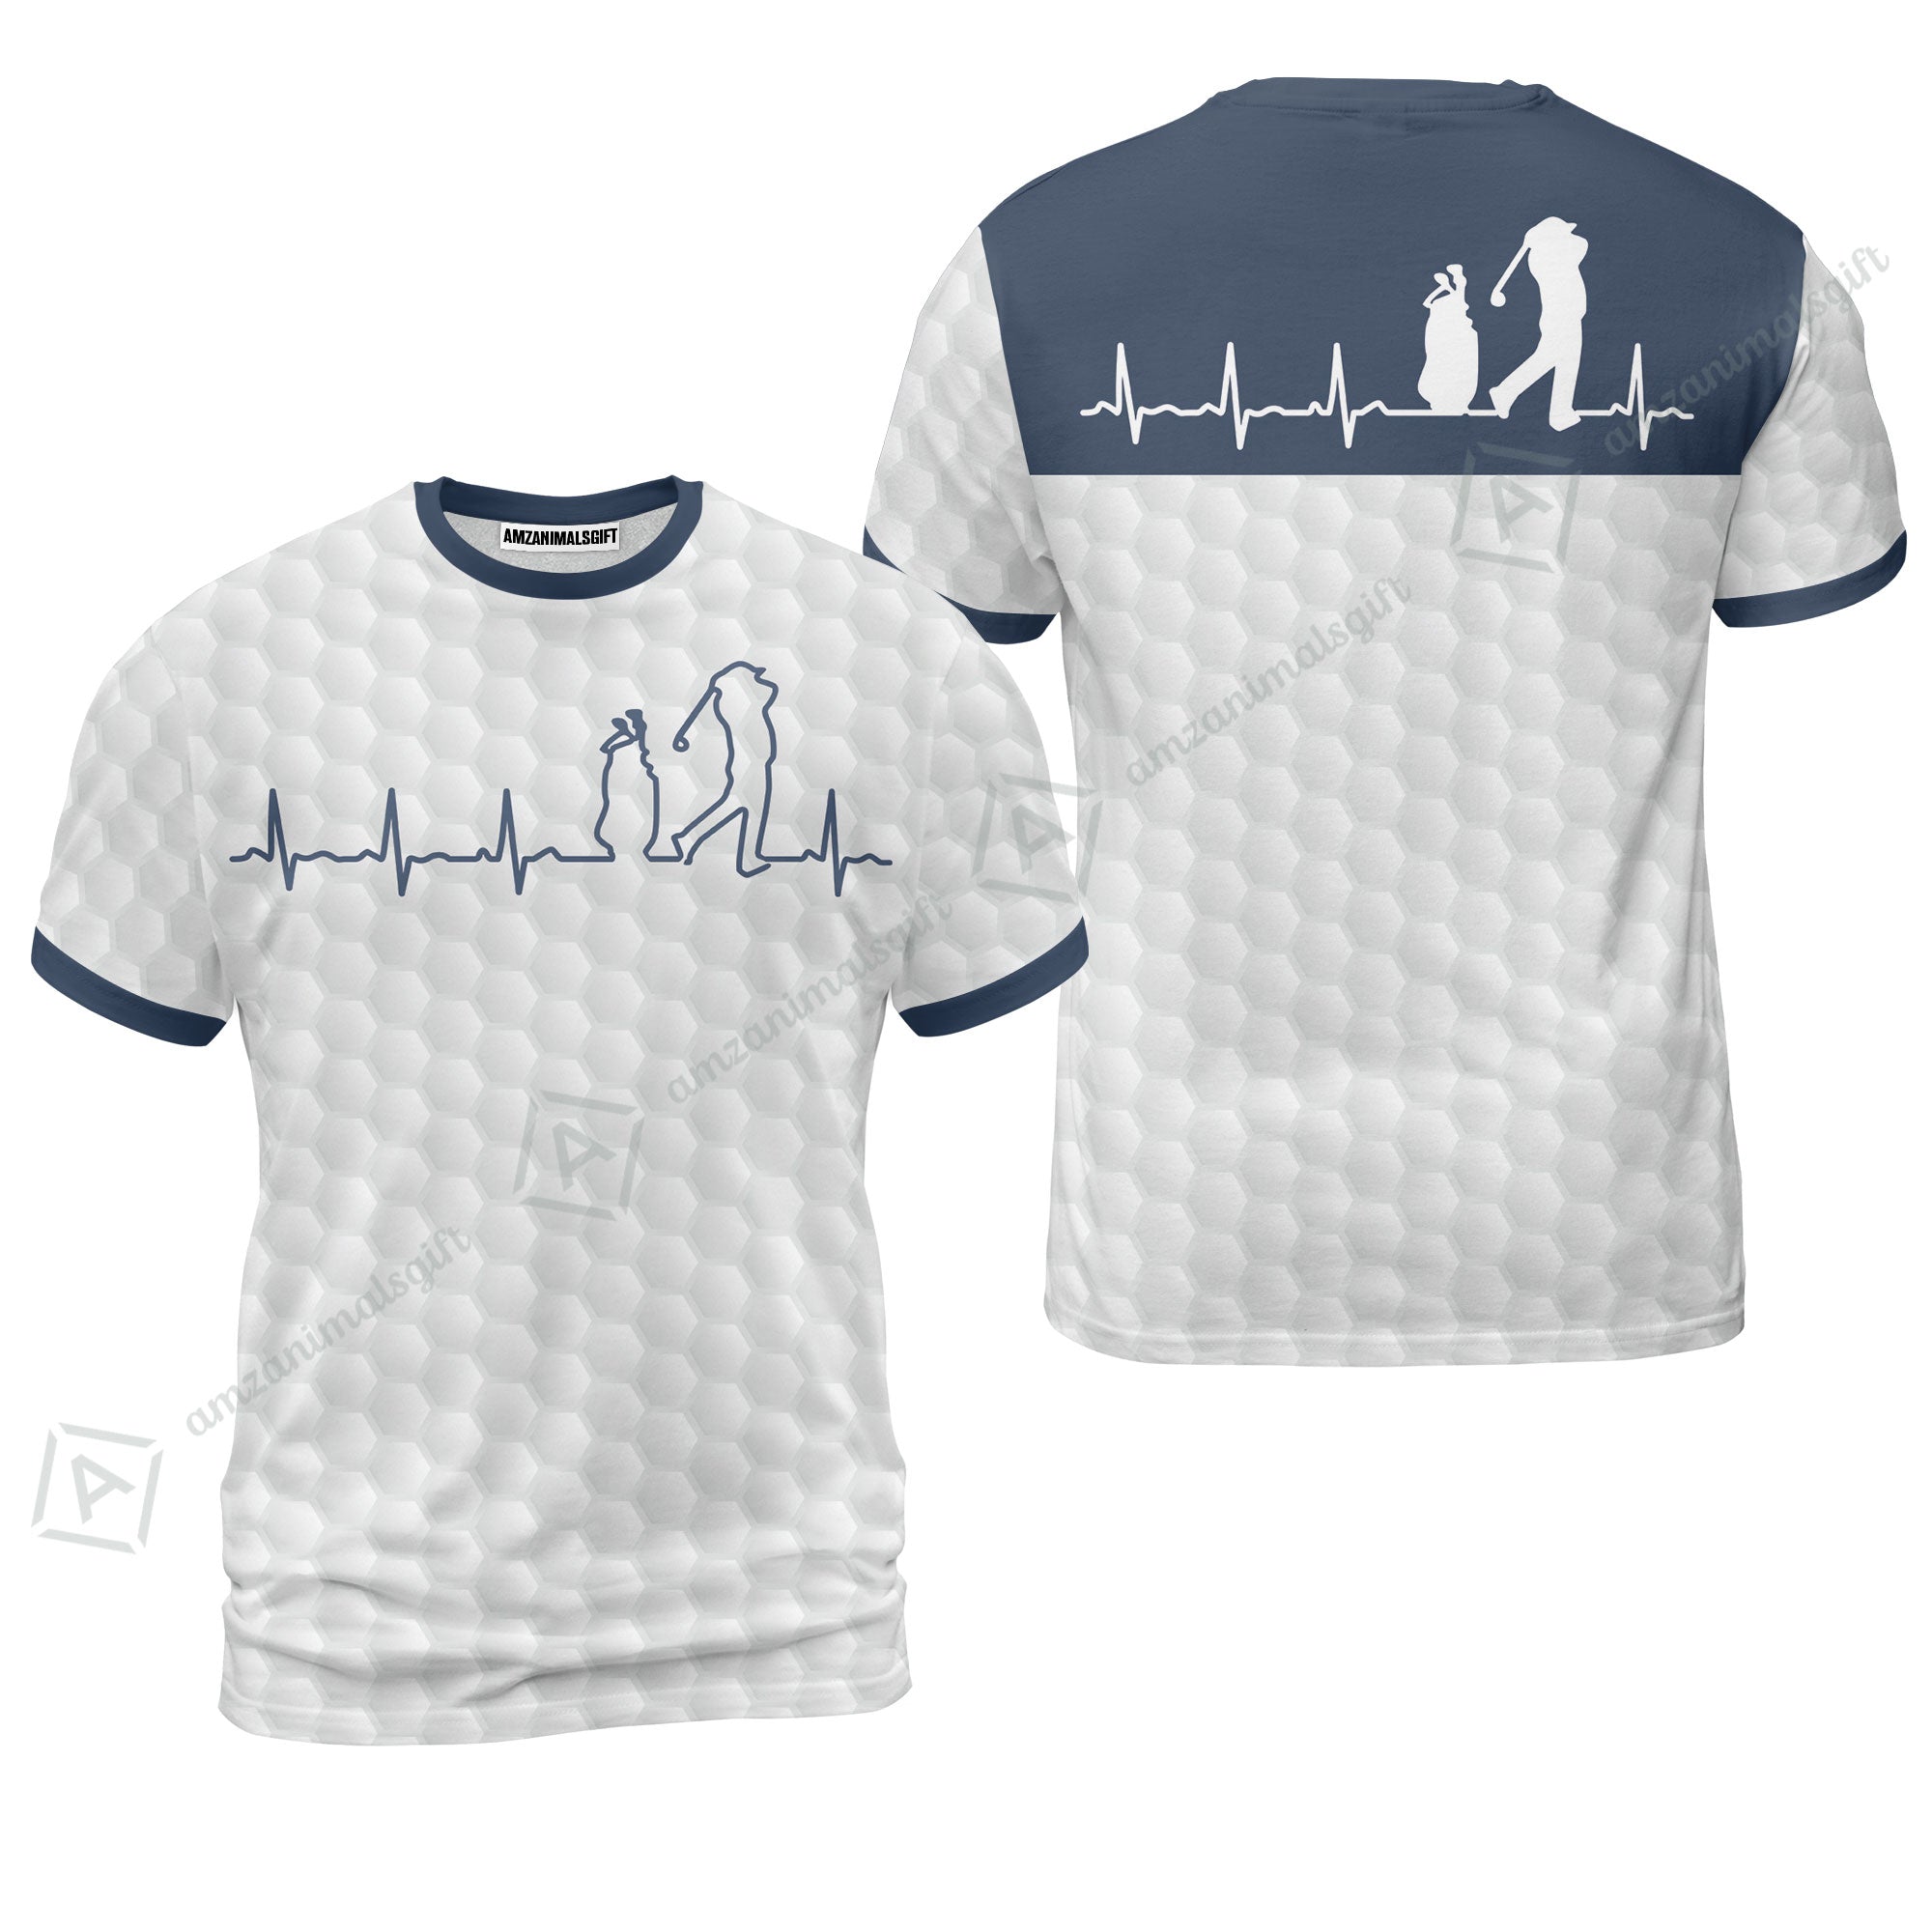 Golf T-shirt - Heartbeat Golfer White And Navy Golf T-shirt, White Golf Ball Pattern T-shirt- Best Gift For Golfers